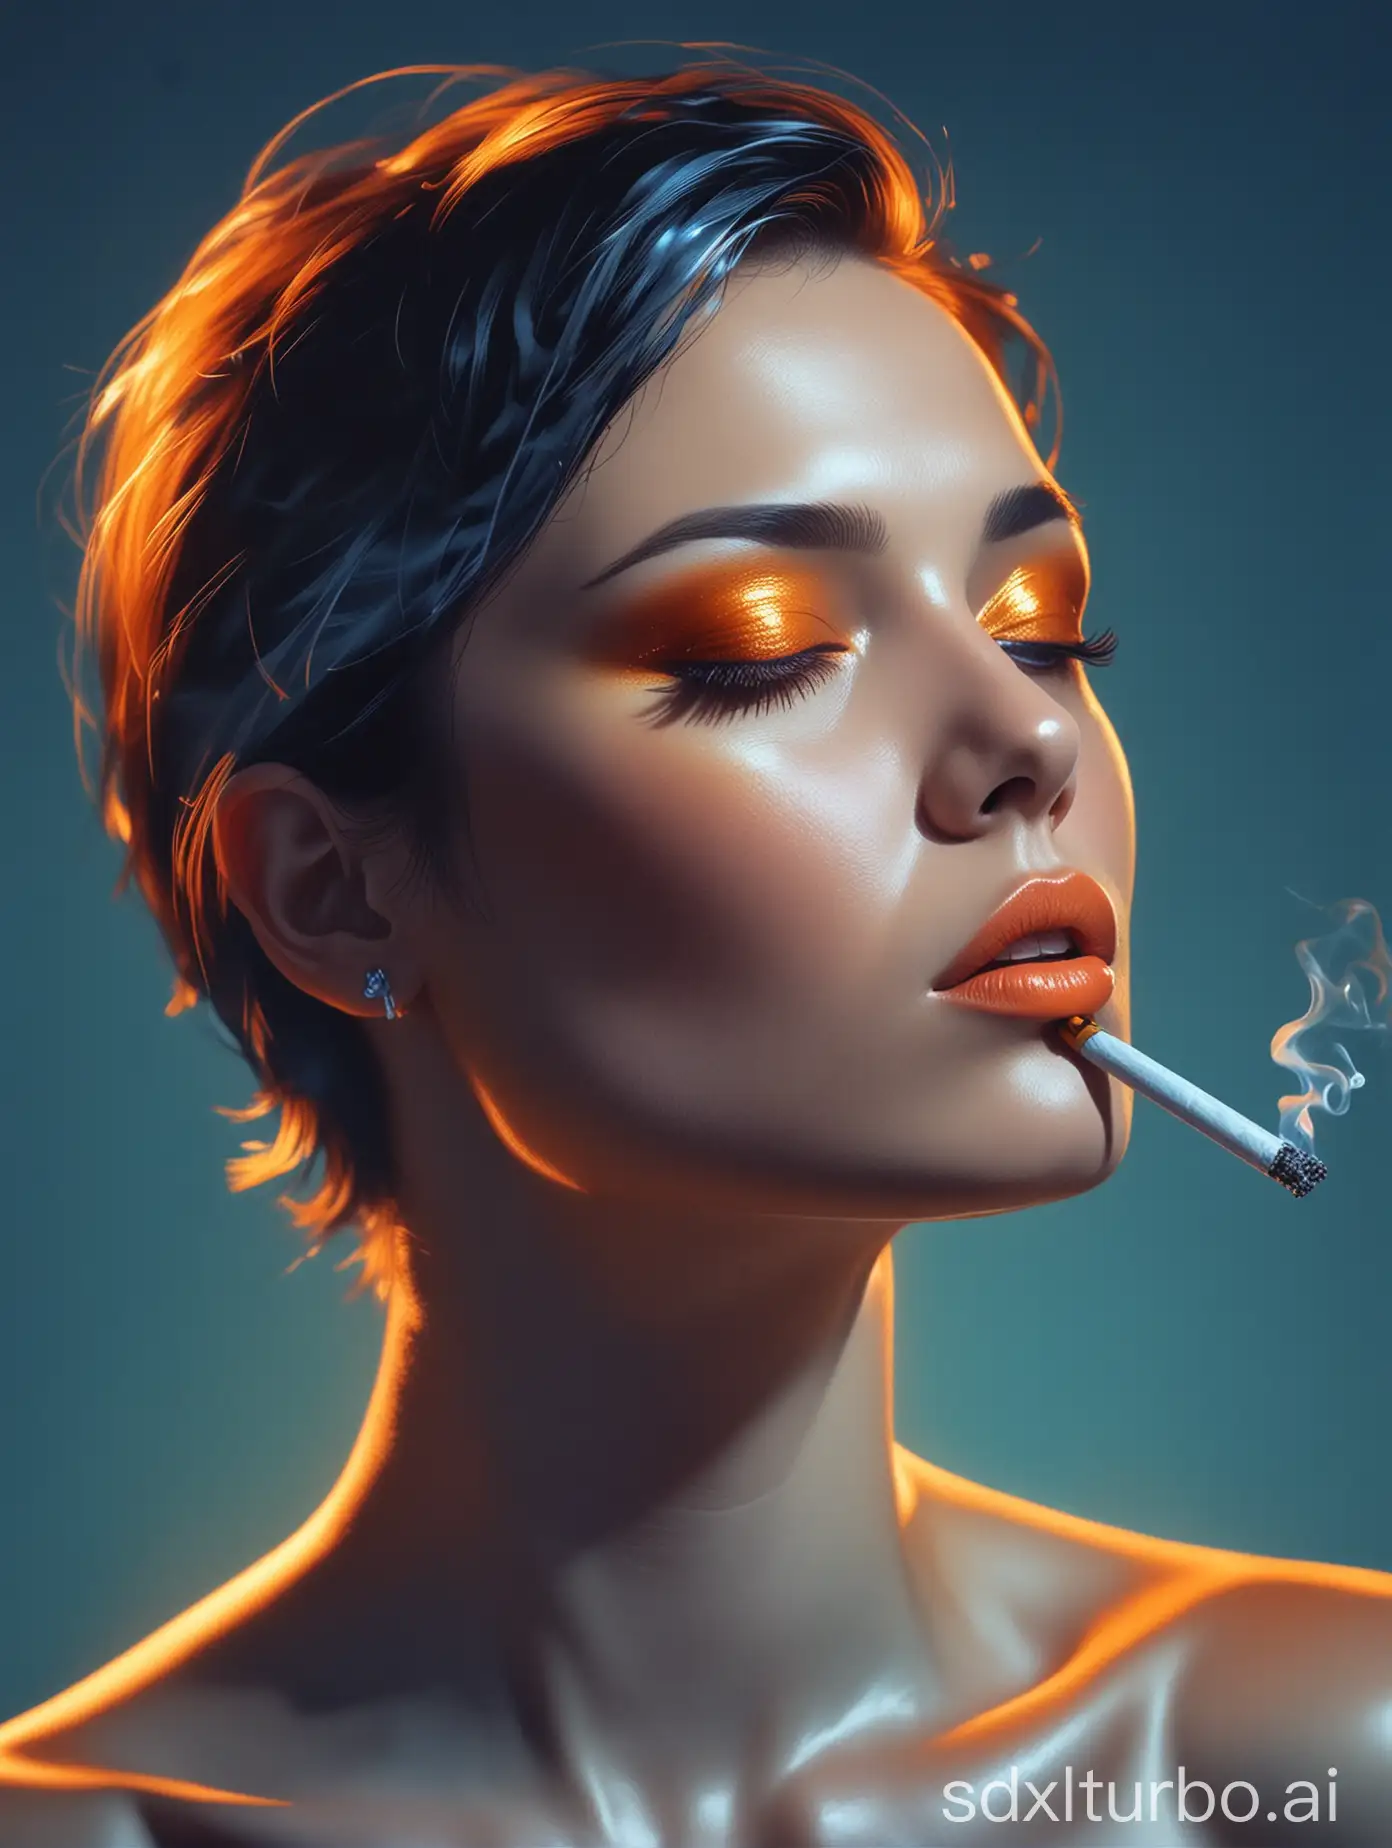 Chrome-Woman-Smoking-Cigarette-with-Blue-Background-and-Orange-Reflections